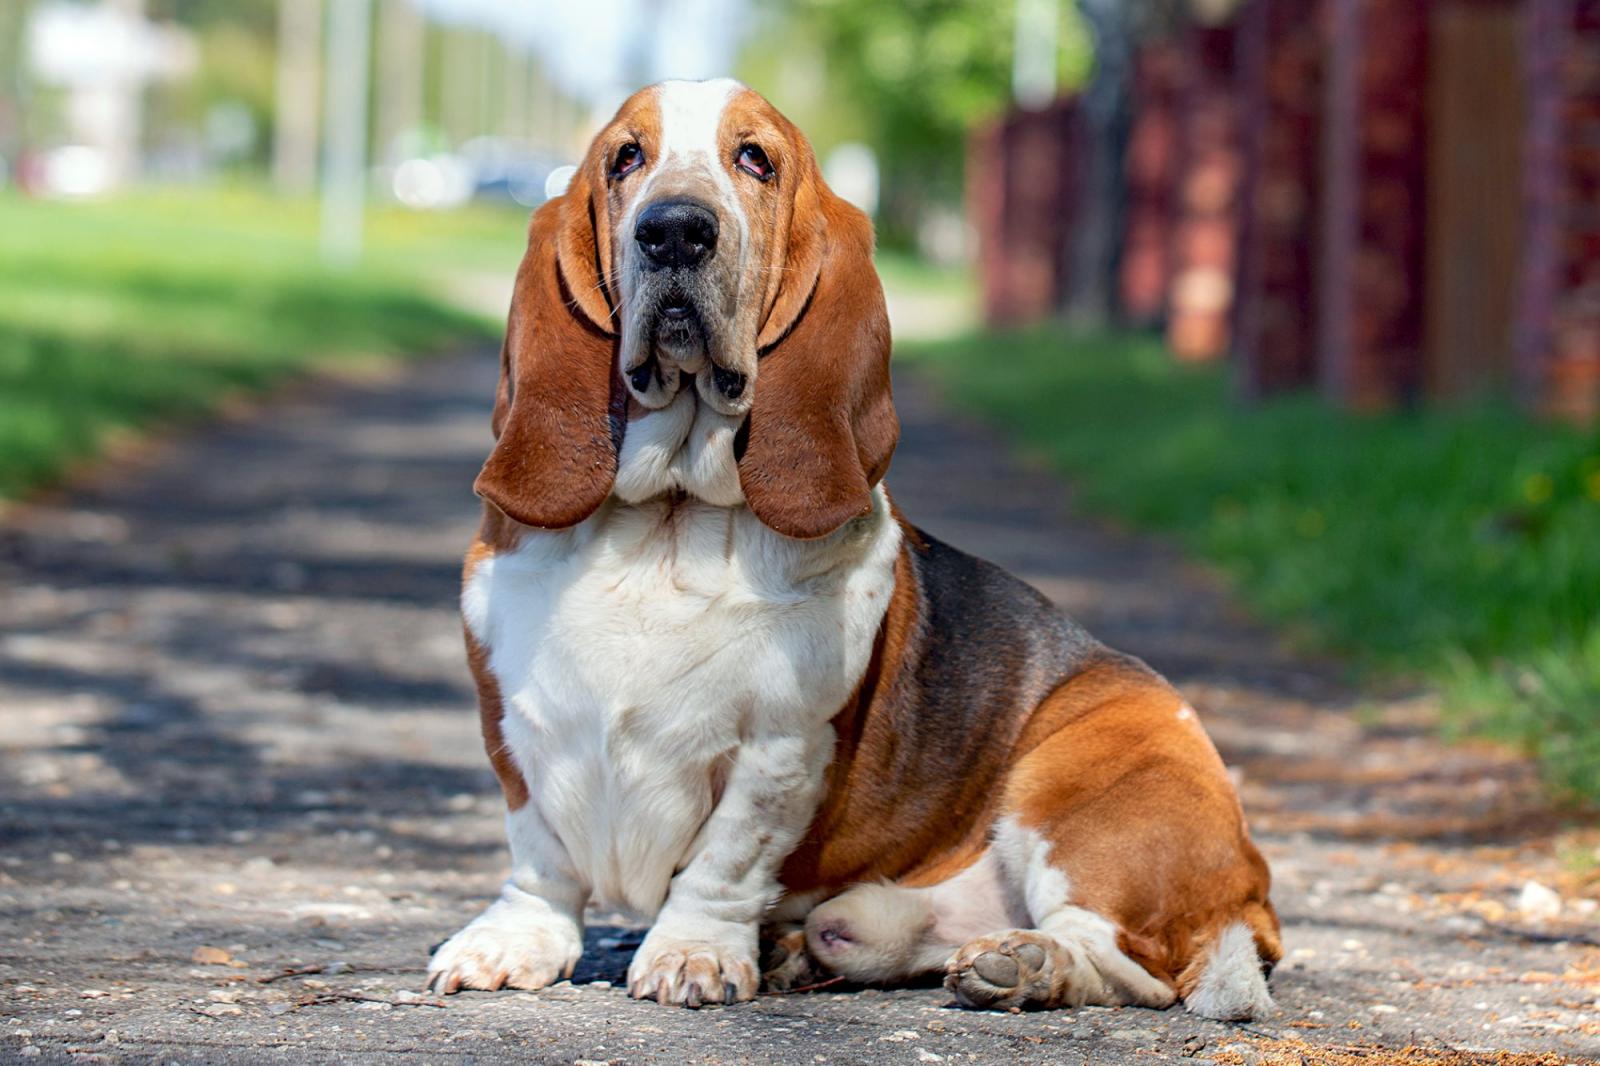 If You Want to Know the Number of 👶🏻 Kids You’ll Have, Choose Some 🐶 Dogs to Find Out Basset Hound